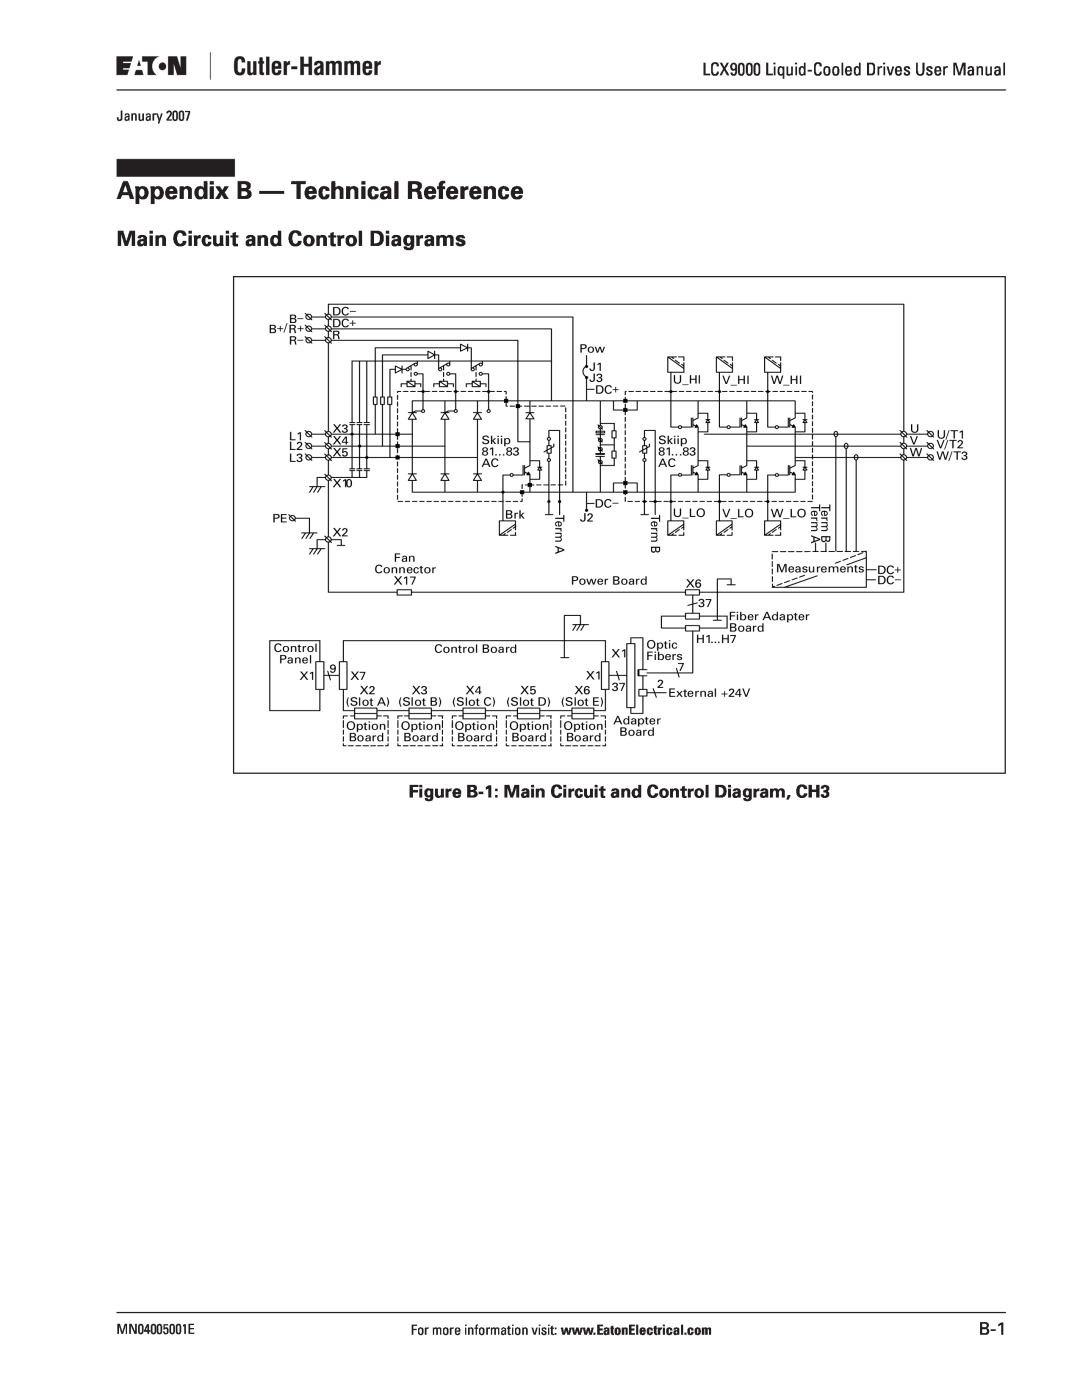 J. T. Eaton LCX9000 user manual Appendix B - Technical Reference, Main Circuit and Control Diagrams, January, MN04005001E 